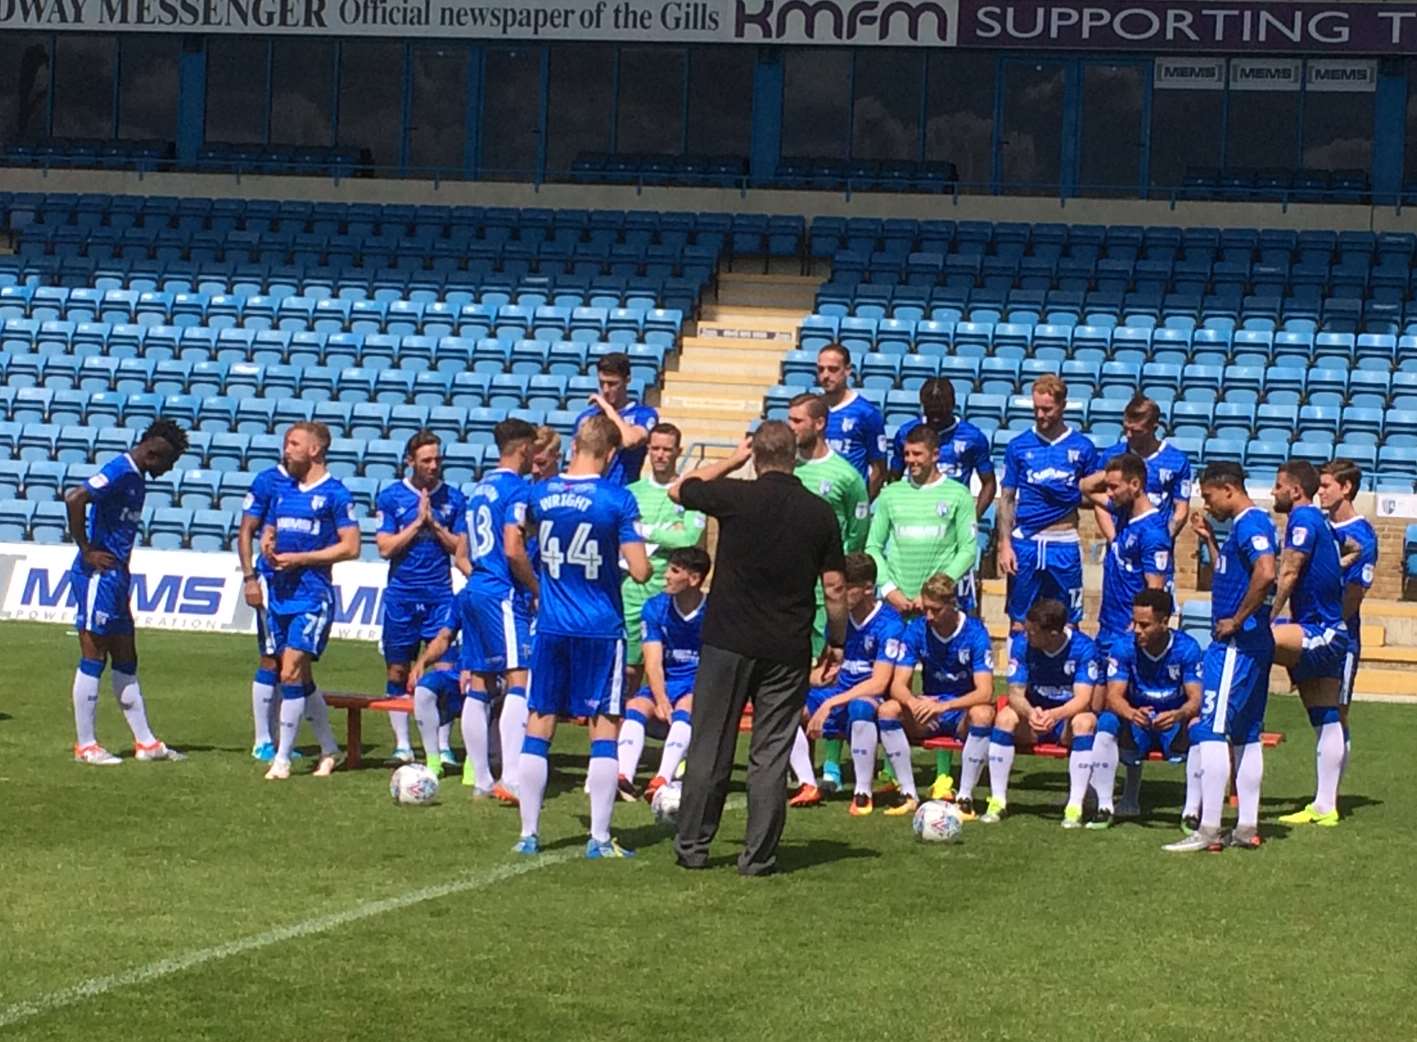 Josh Wright getting the Gills team in position for the picture